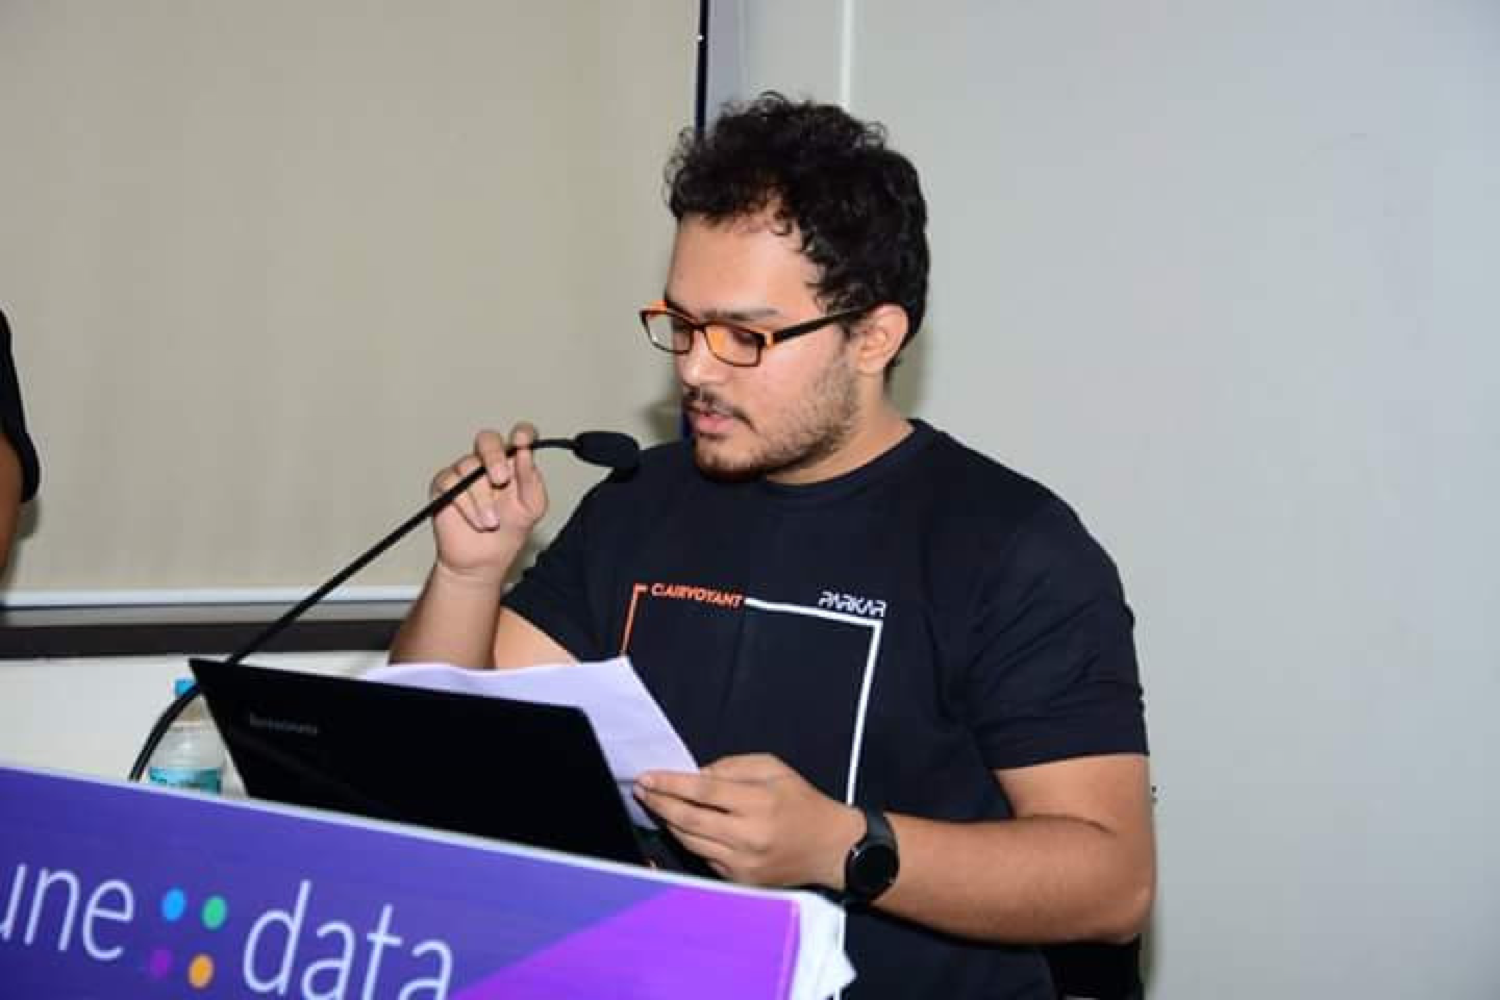 Pune Data Conference